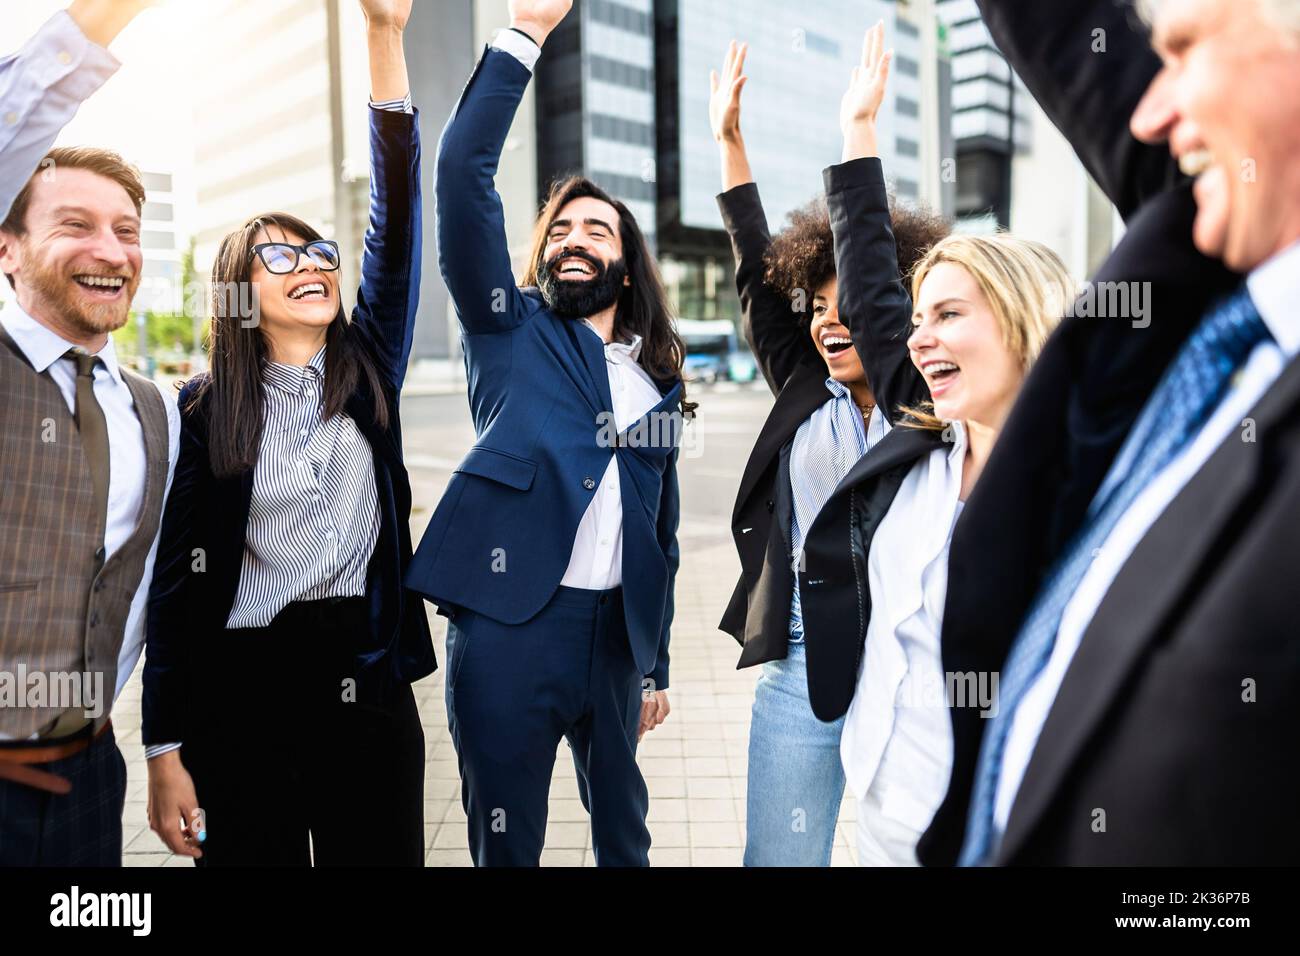 Business team of diverse people celebrating success outside enterprise office Stock Photo